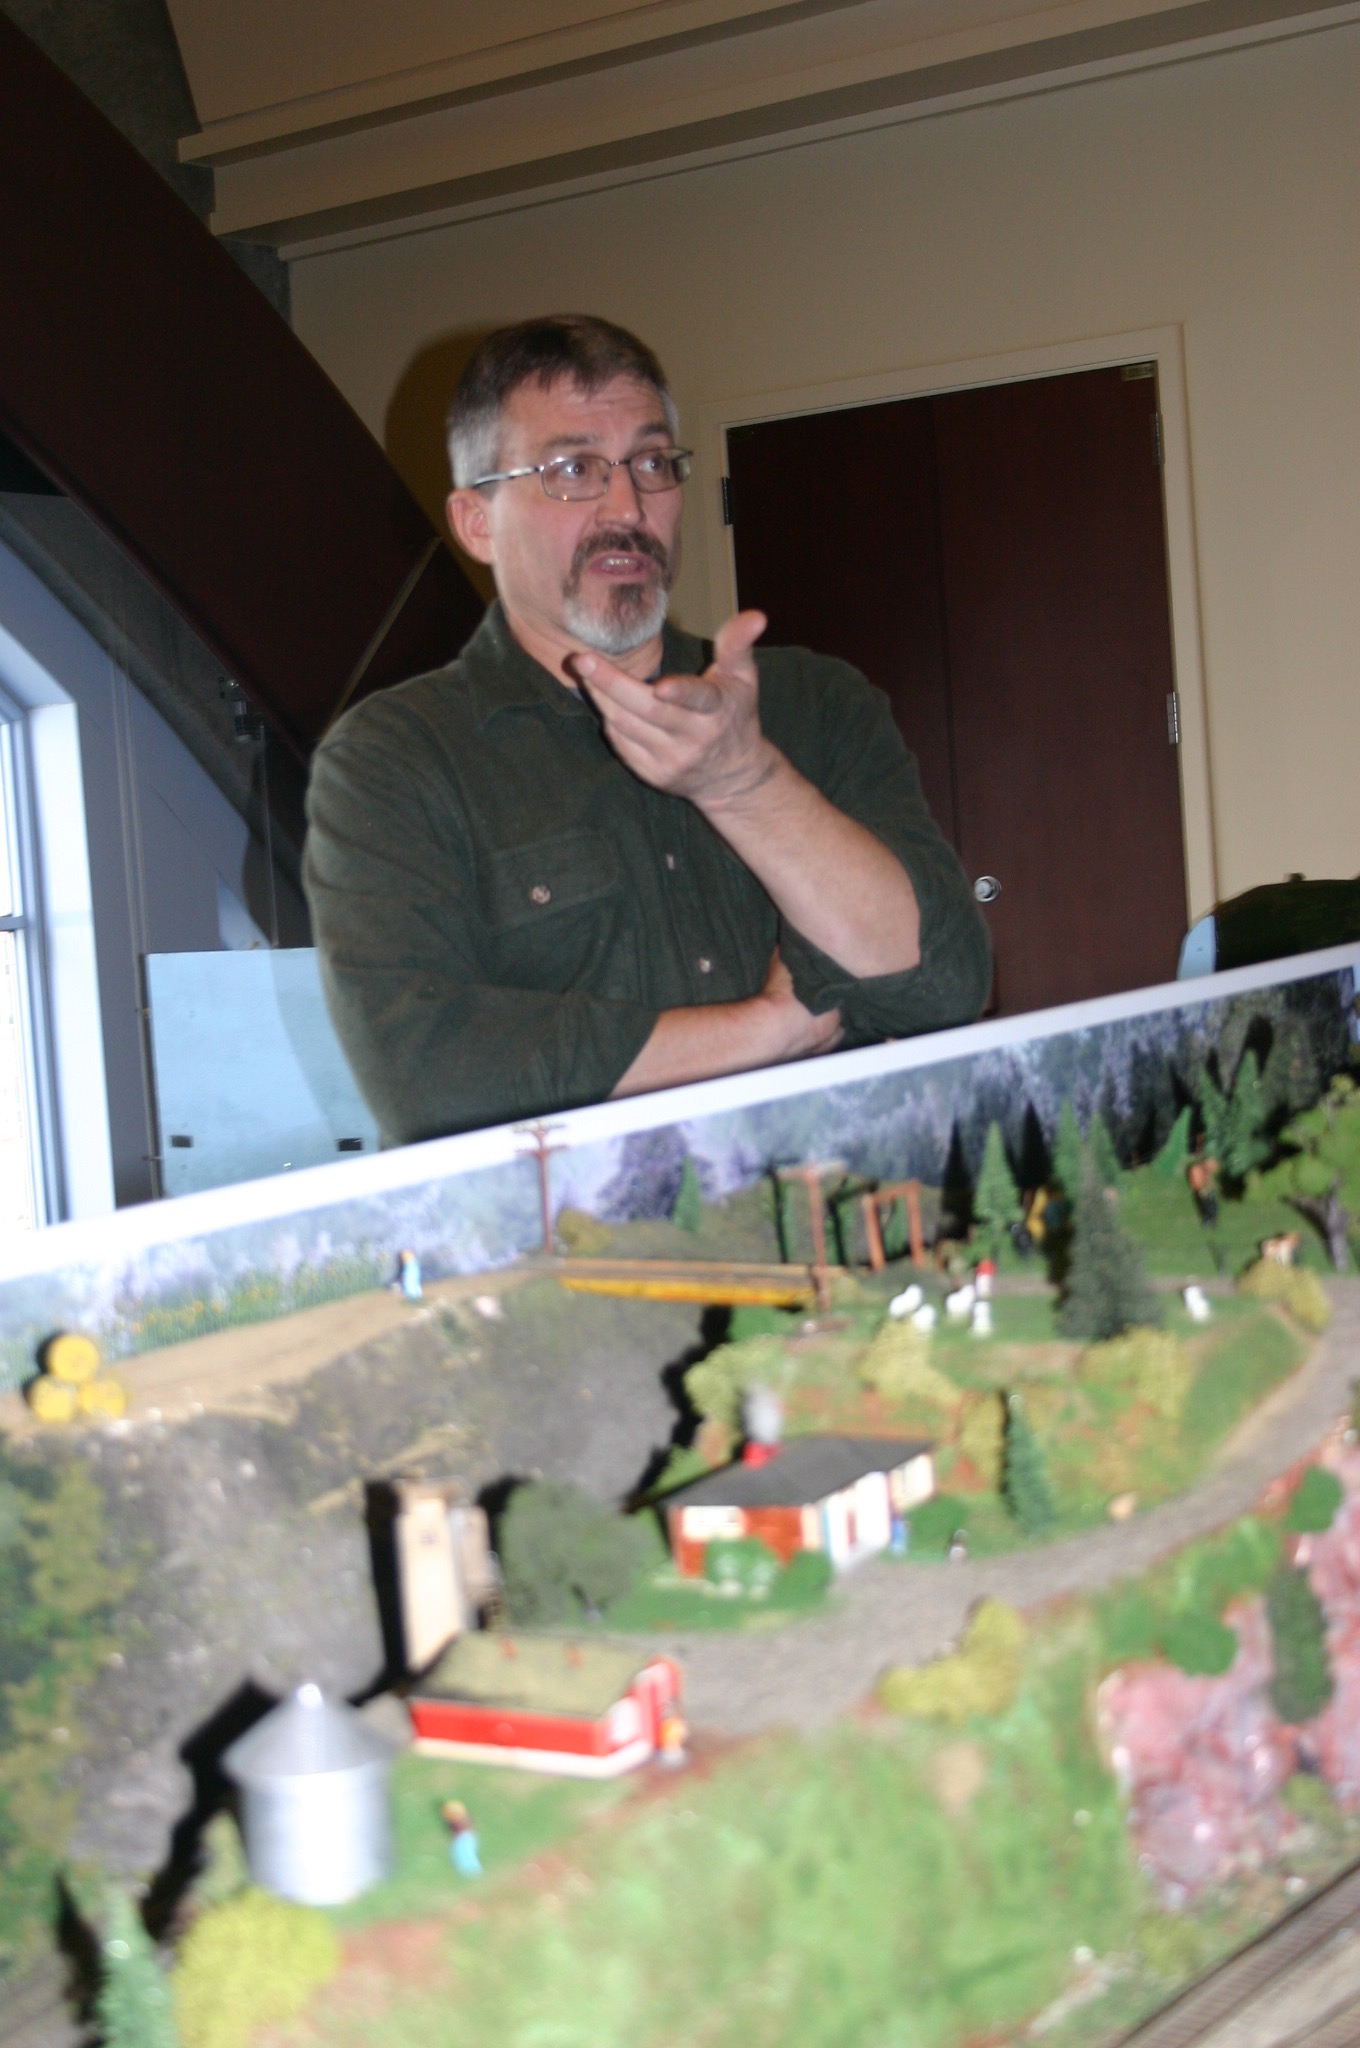 Steve Cox, Puyallup, discusses the Tacoma Northwestern Model Railroad Club's layout for the Model Train Festival at the Washington State History Museum. Credit: David Guest / TDI